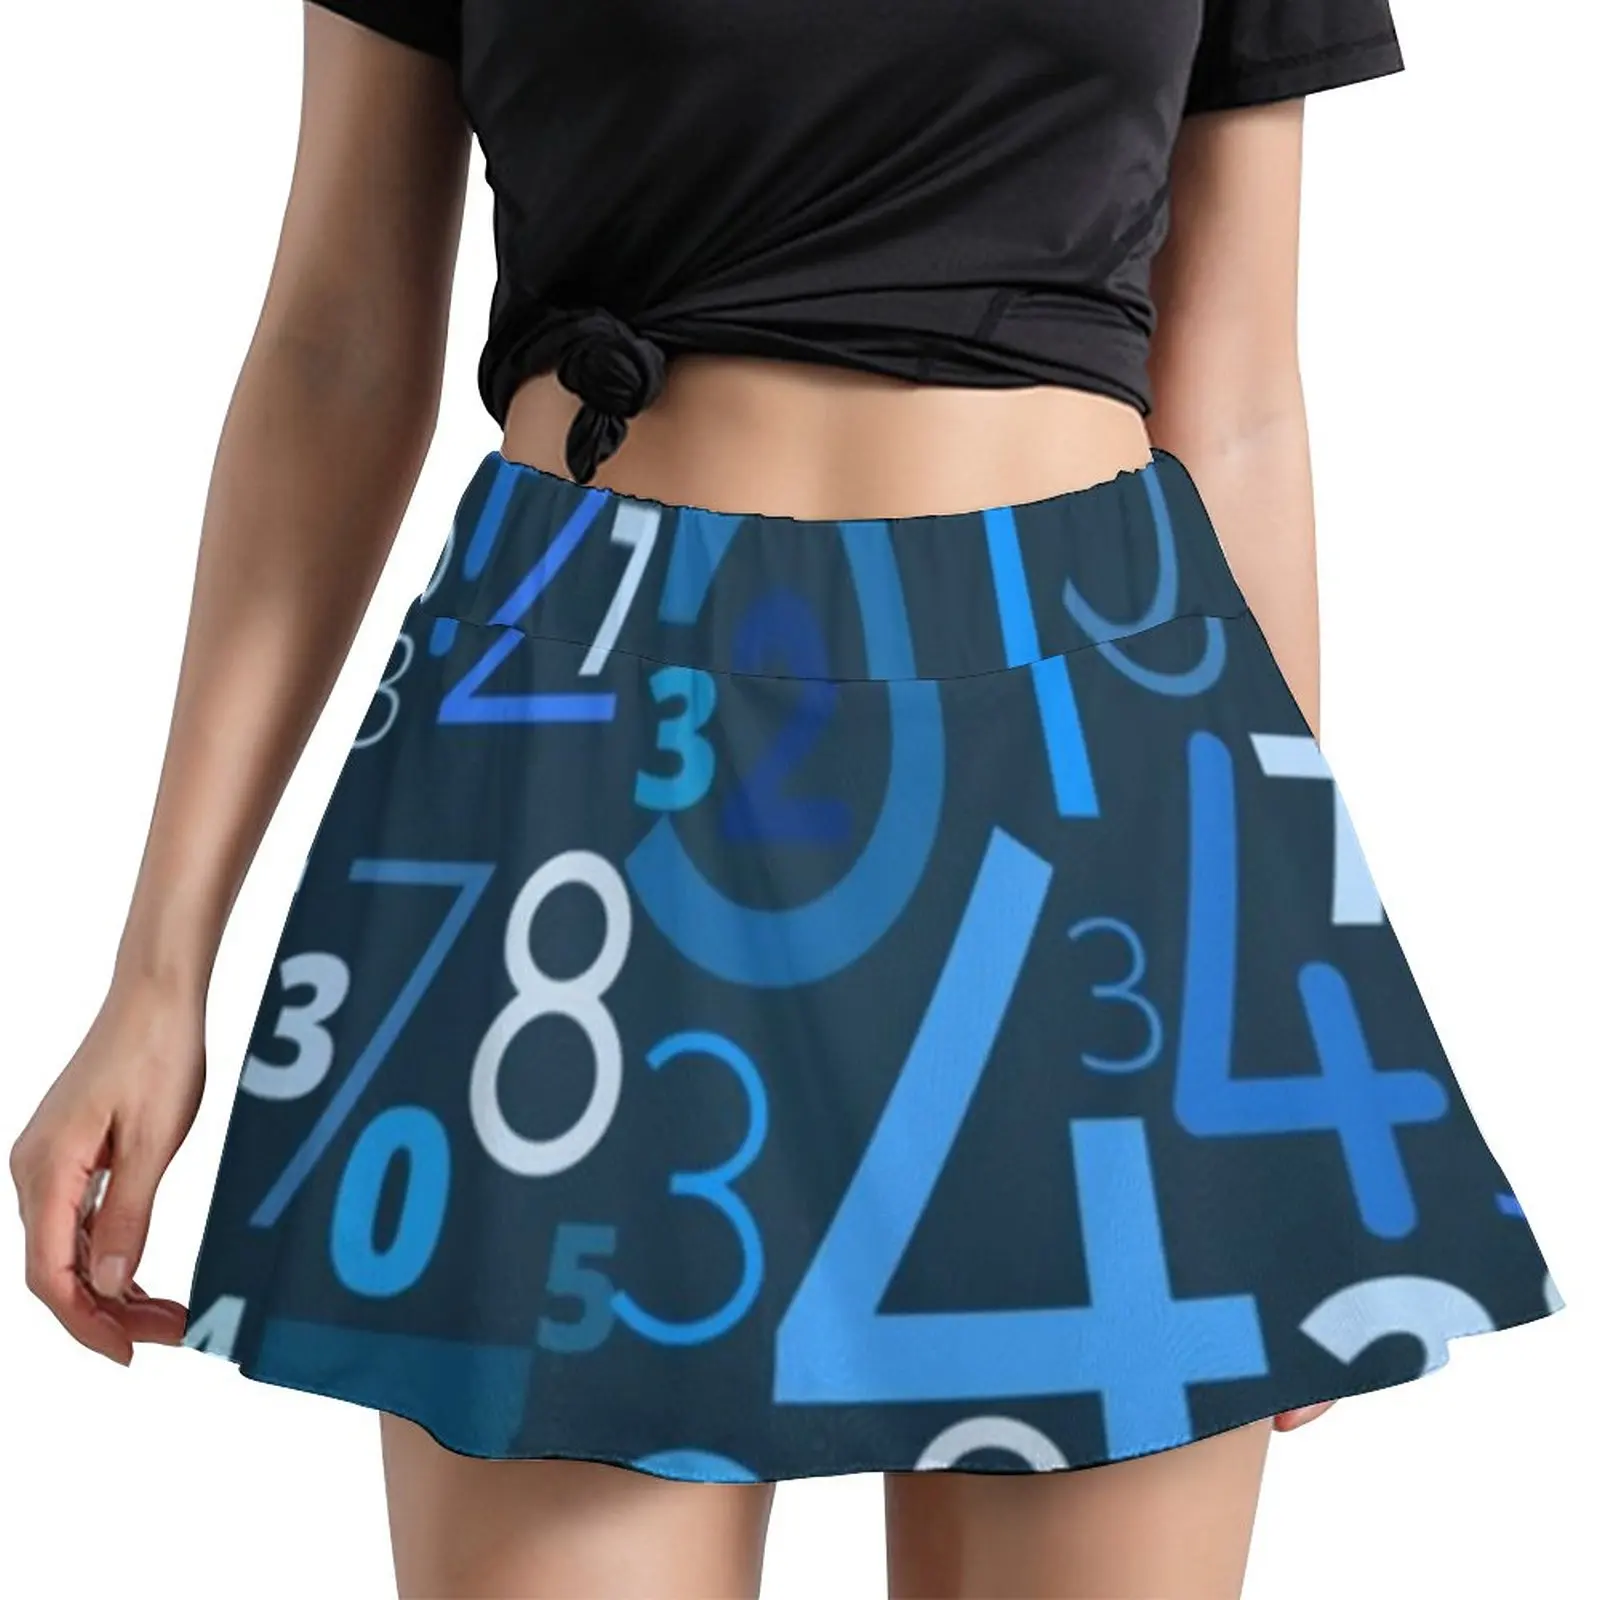 

Math Numbers Skirt Woman Colorful Code Print Elegant Mini Skirts Summer Y2K High-waisted Graphic Oversized Casual A-line Skirt